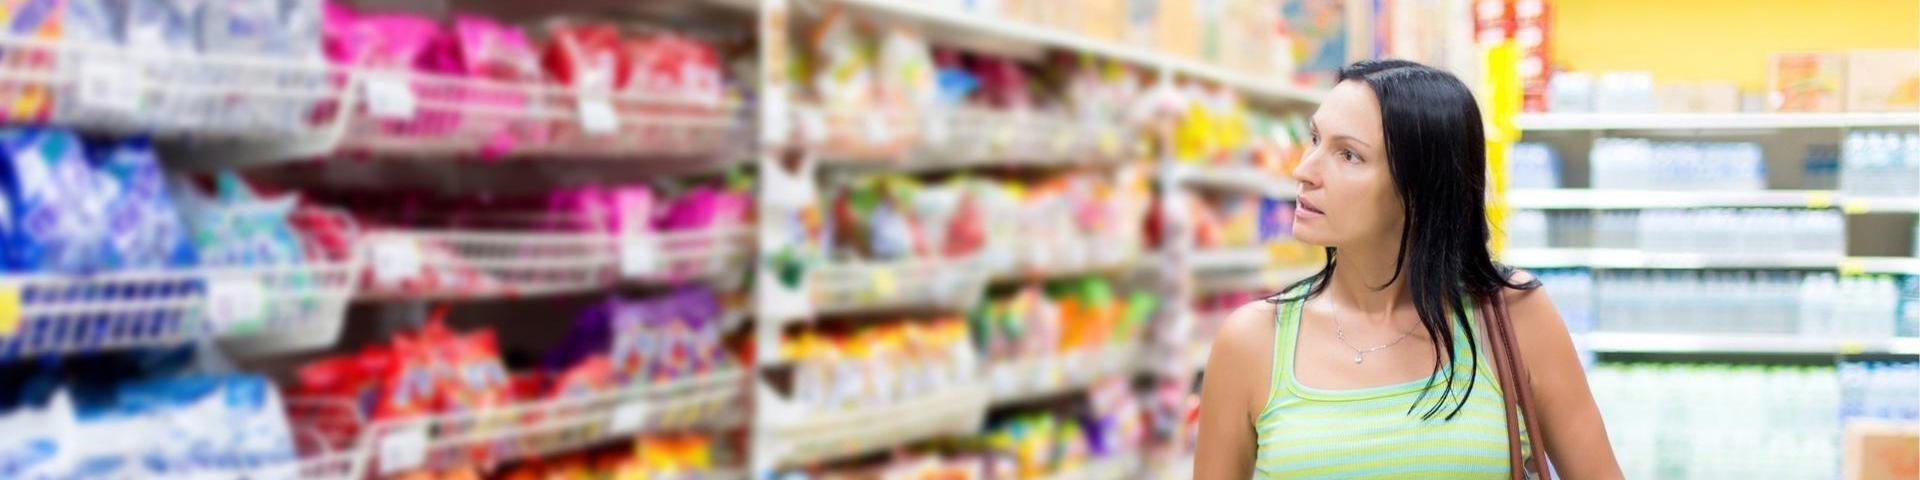 Woman in supermarket thinking about the cost of living payment due to food prices